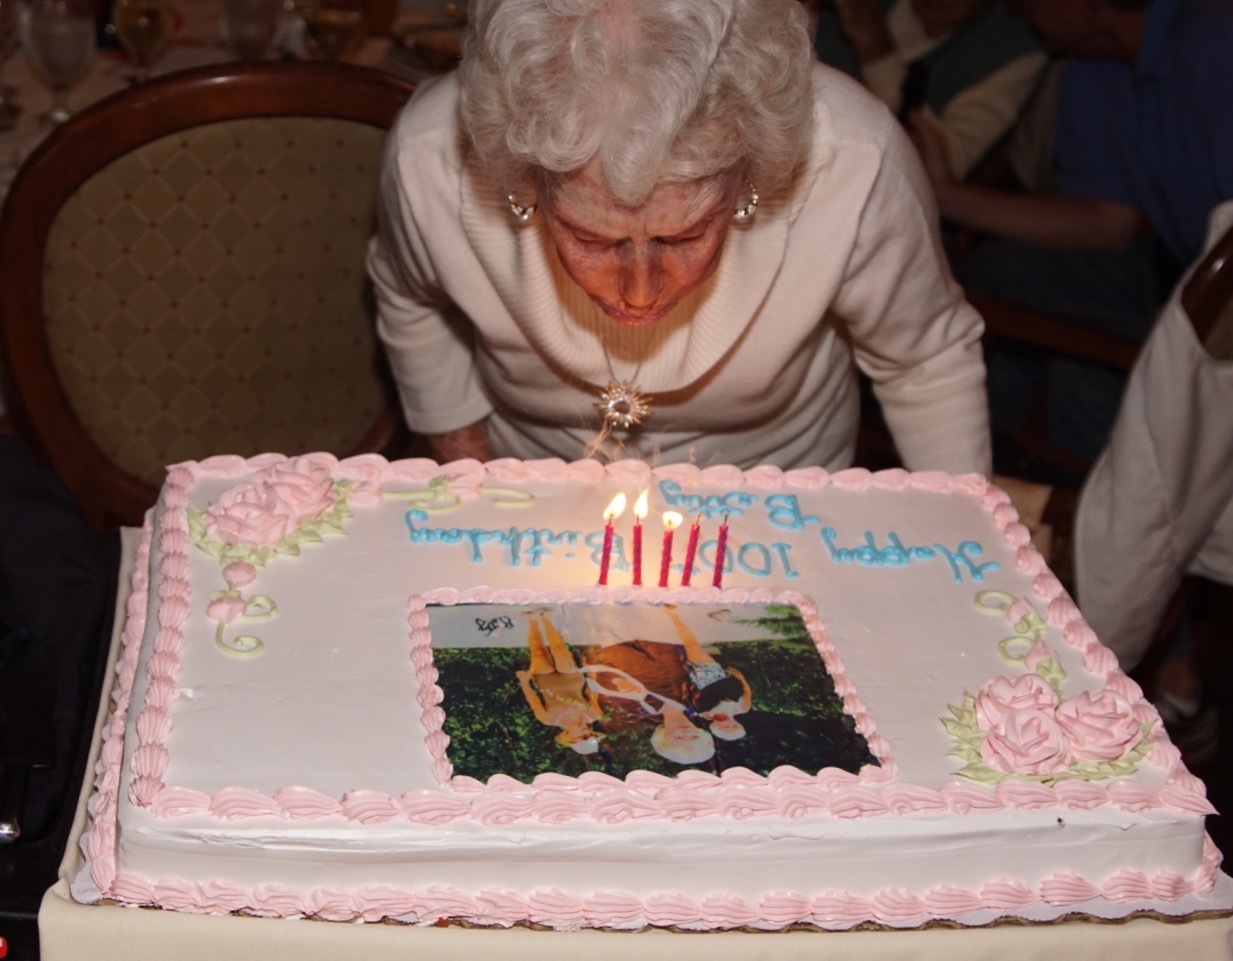 Betty Andreone blows out the candles on a cake that commemorates her appearance in the movie 